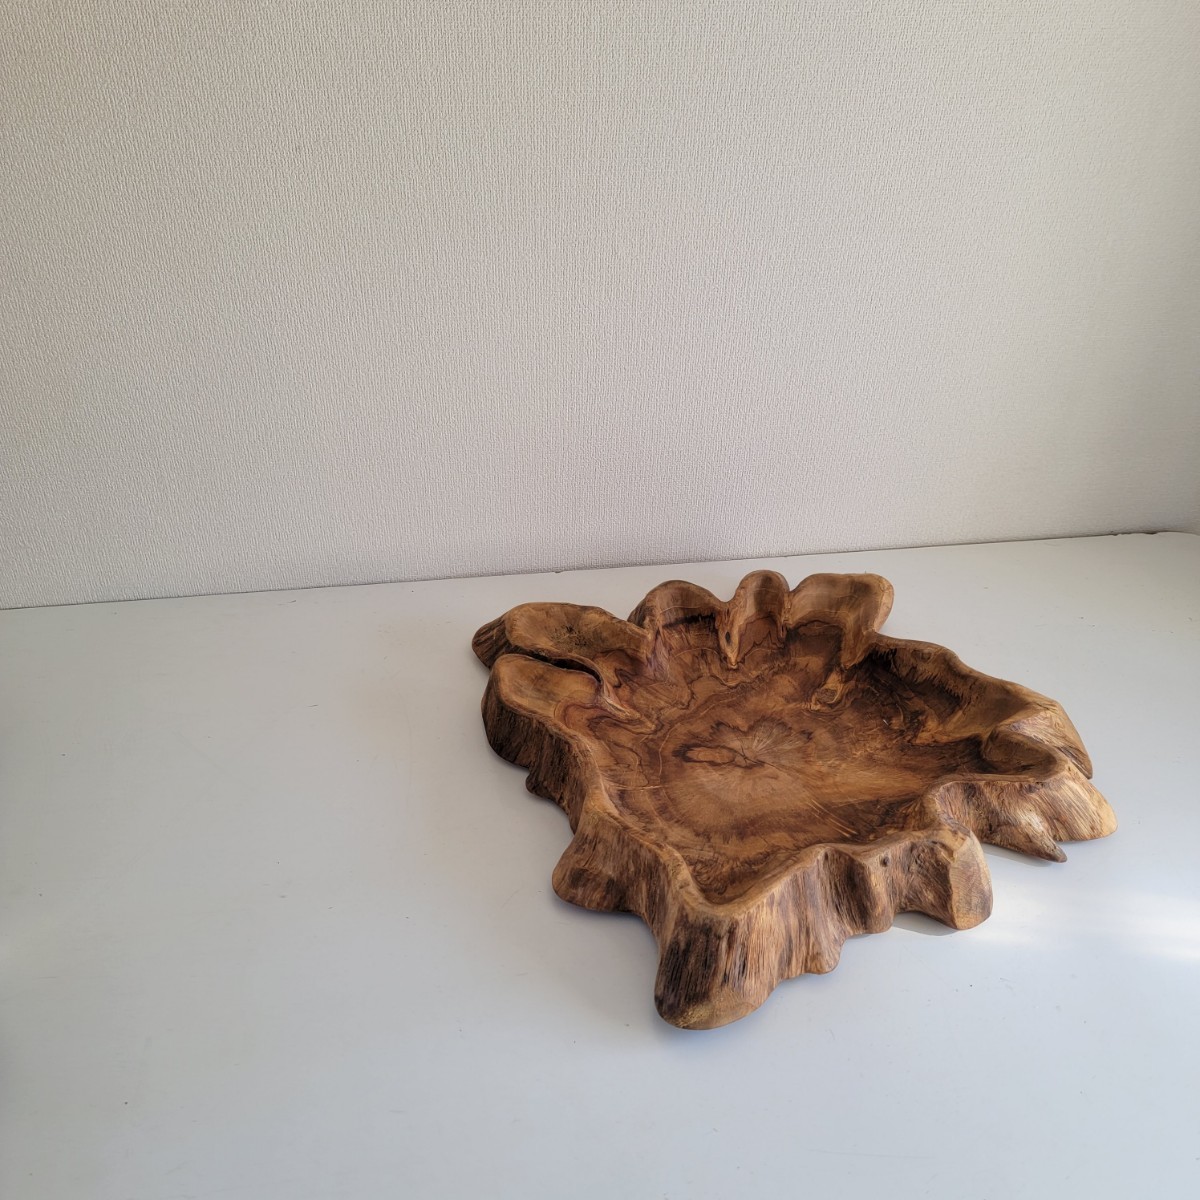  natural tree wooden Old cheeks tray vessel large 55×53cm interior antique one point thing bowl type plate . plate flower vase small storage room natural 